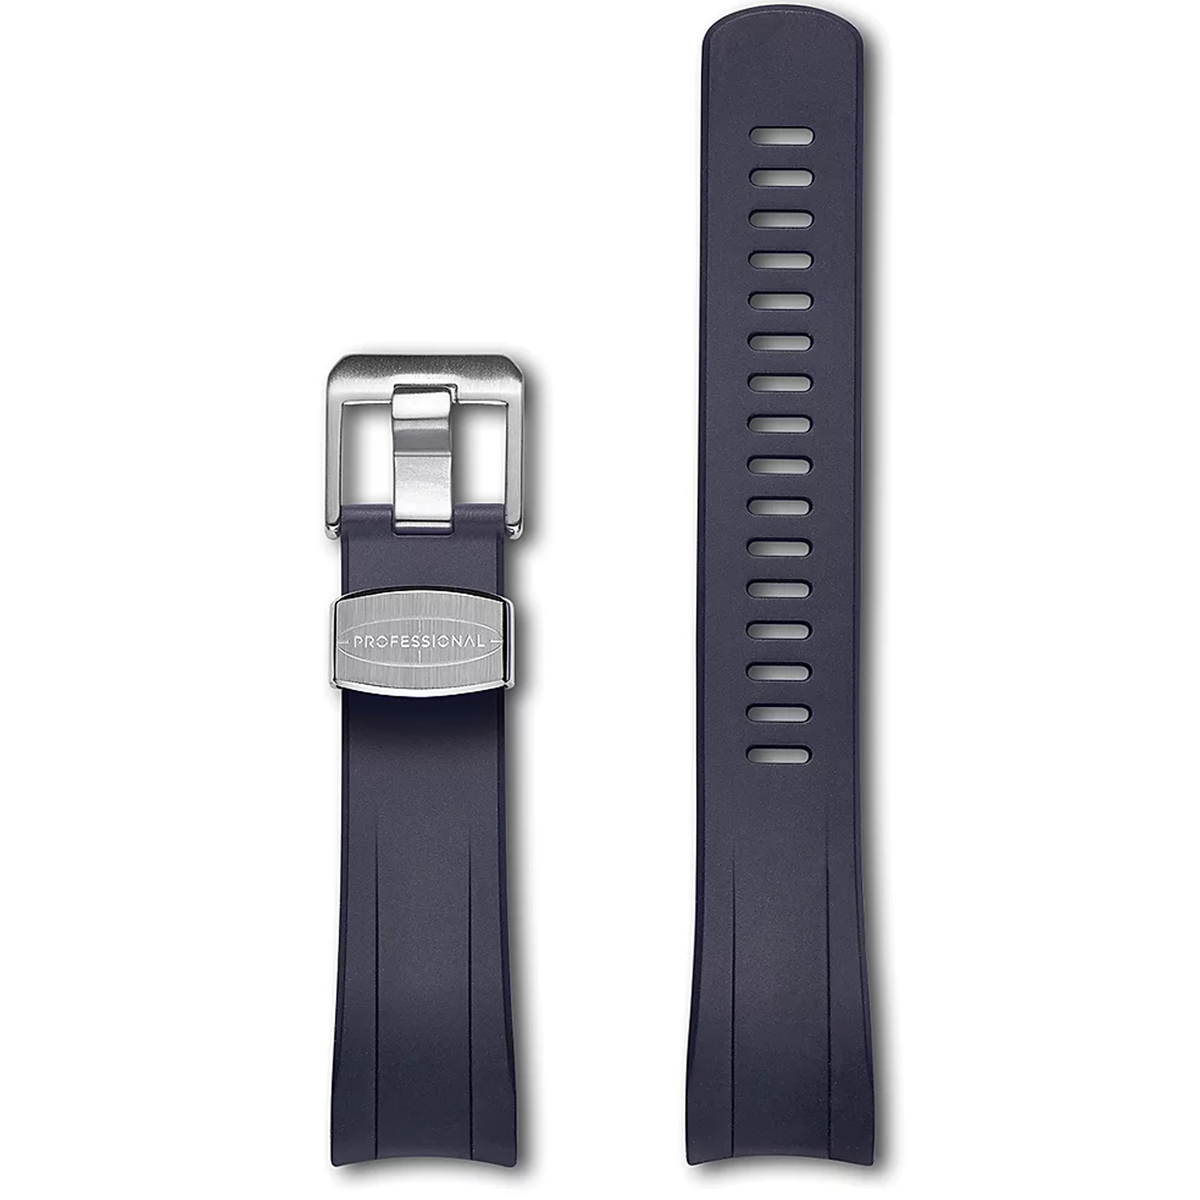 Crafter Blue - Fitted End Rubber Strap for Seiko Samurai